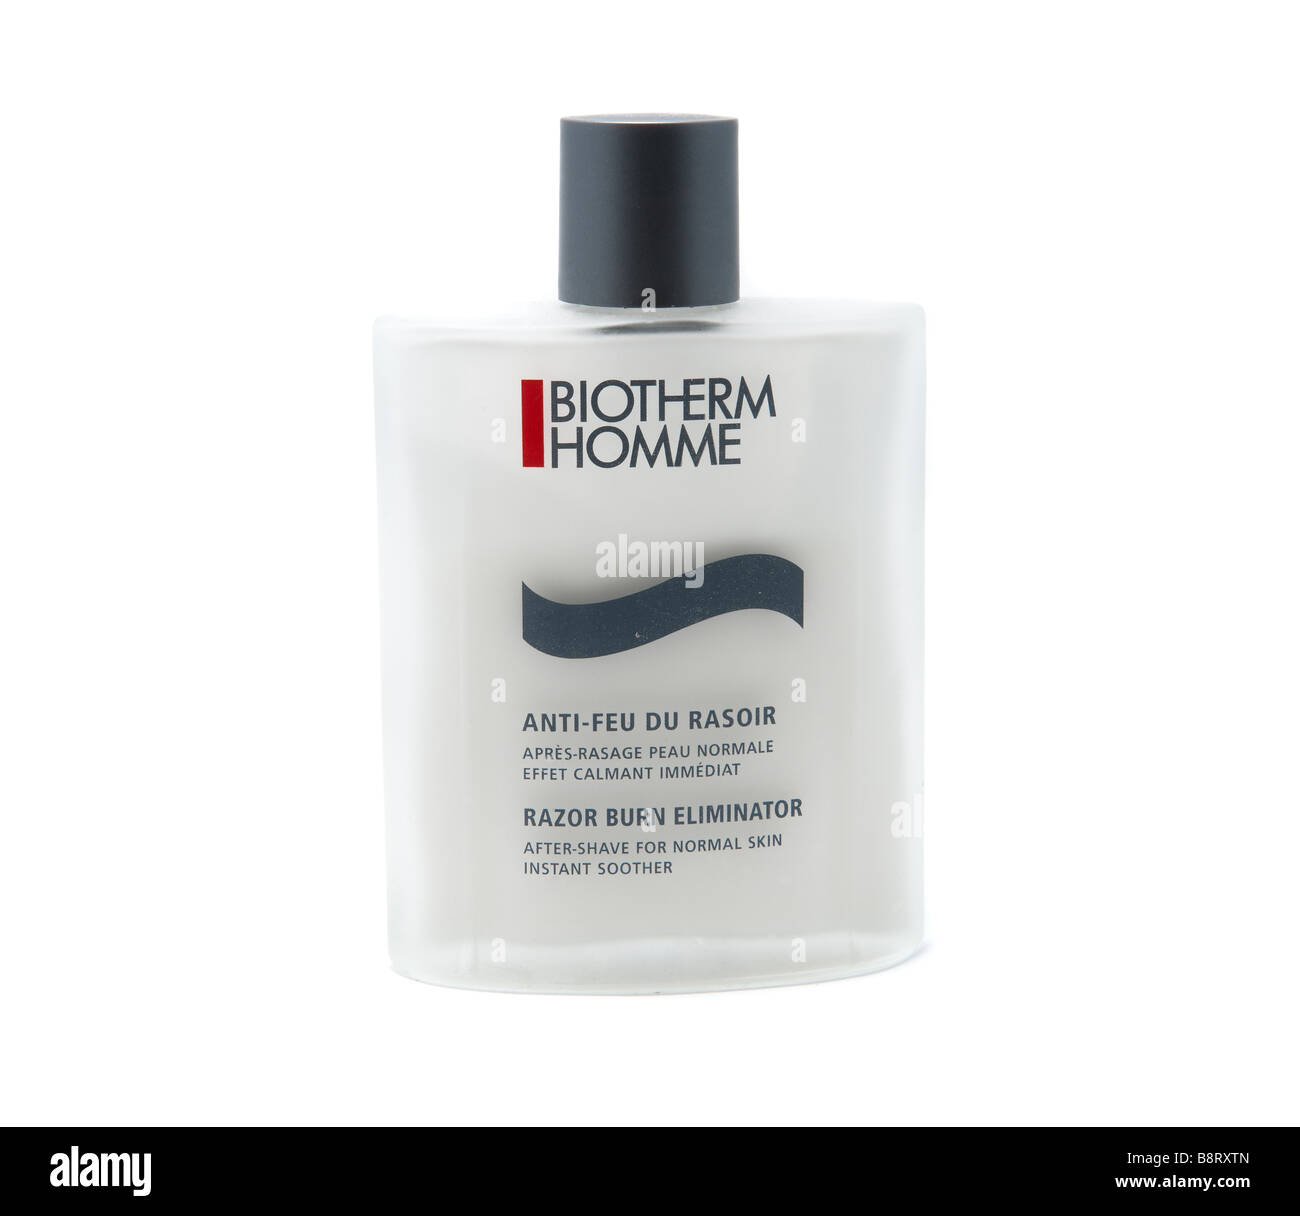 A Biotherm homme after-shave bottle over a white background Stock Photo